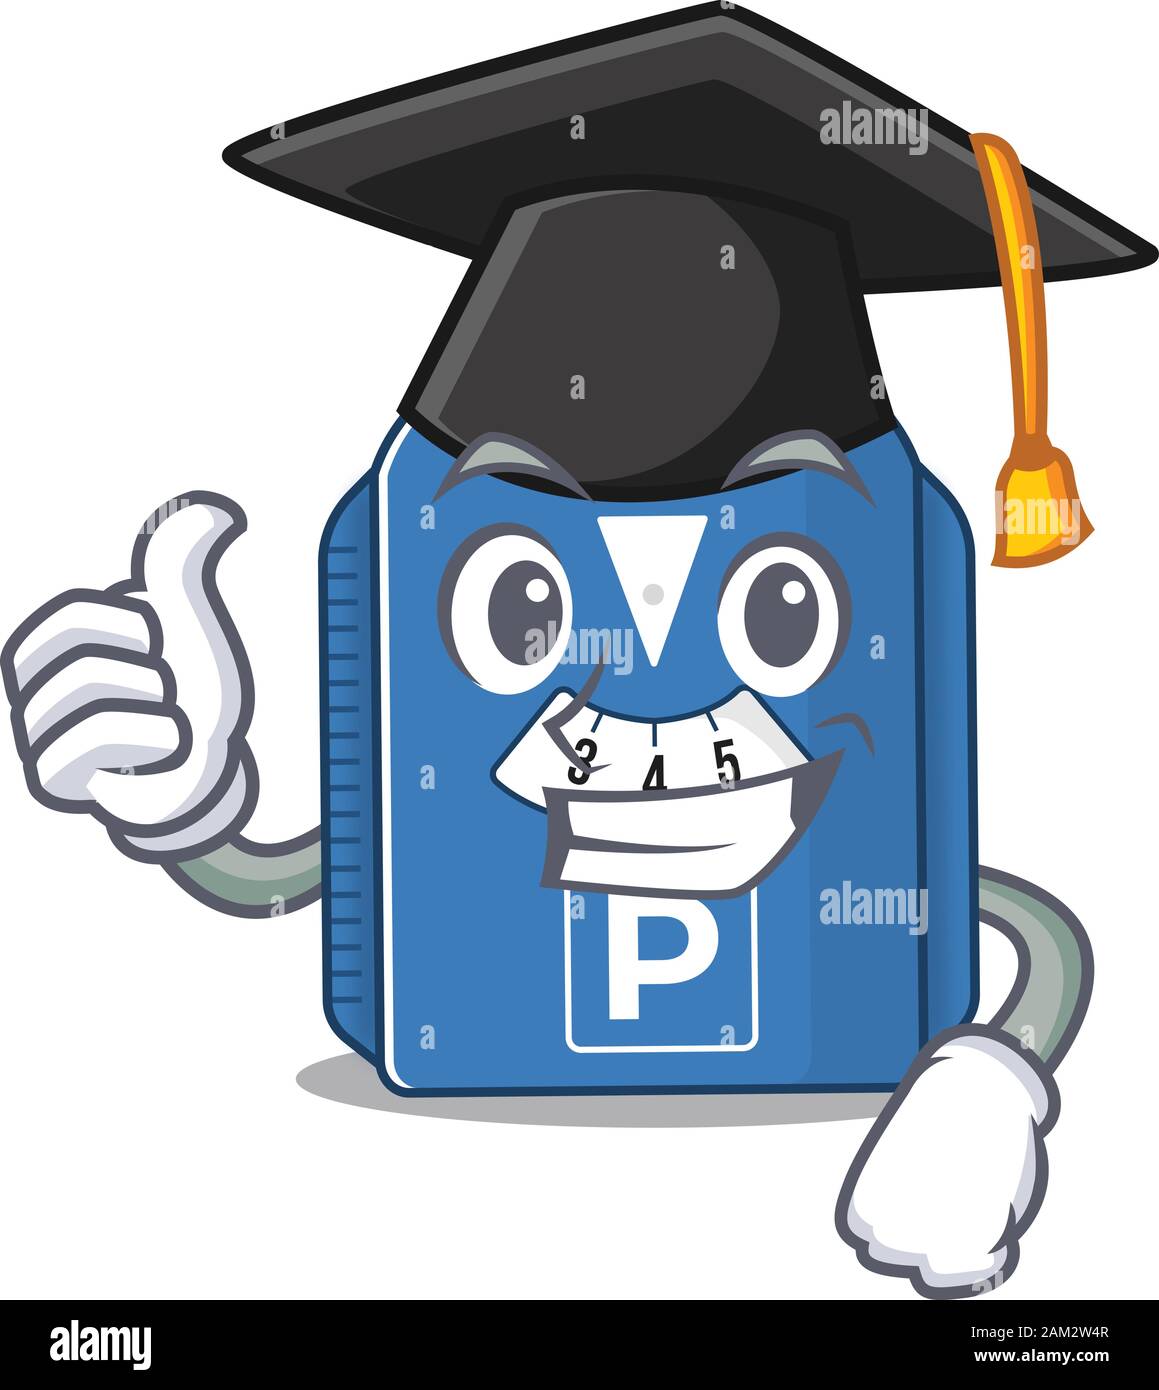 happy and proud of parking disc wearing a black Graduation hat Stock Vector